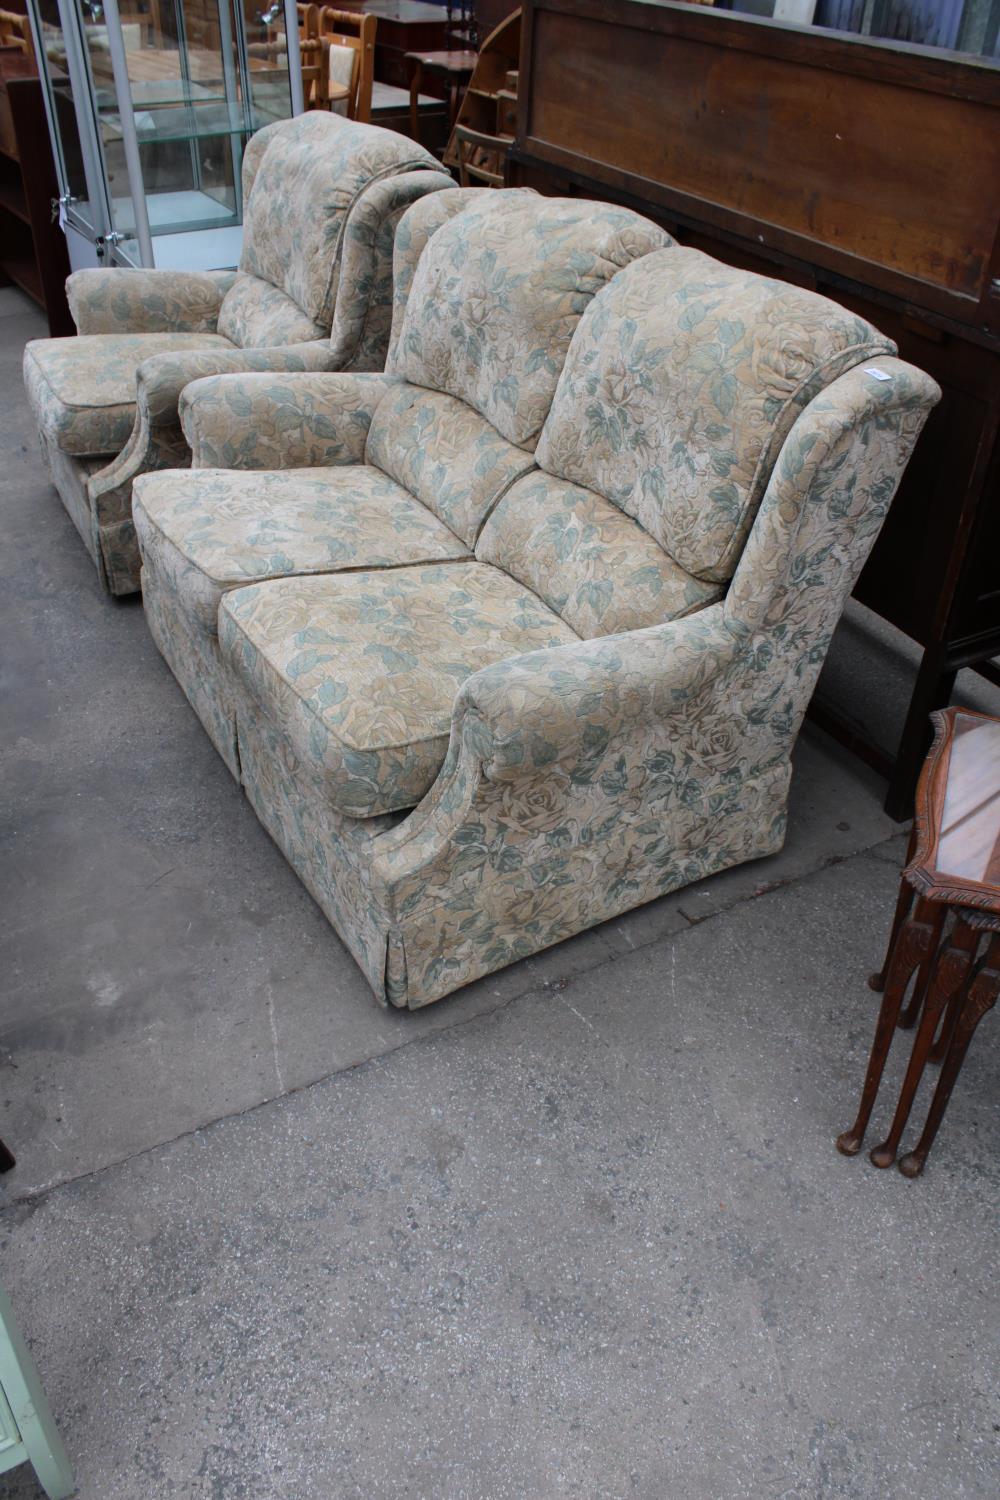 A MODERN G.PLAN TWO SEATER SETTEE AND A MATCHING RECLINER